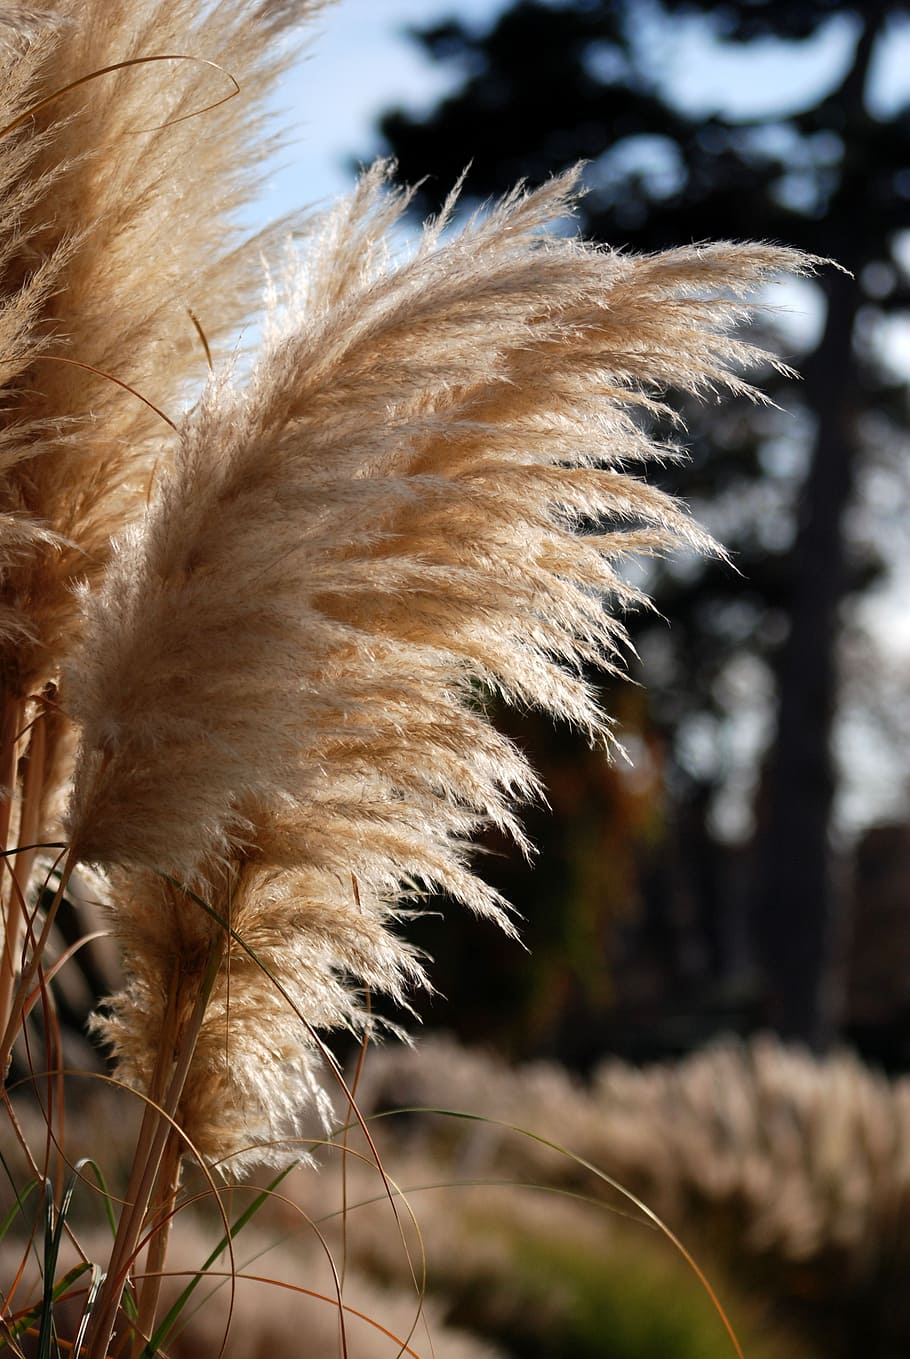 pampas, ornamental grass, natural, close-up, feathery, tall grass, plant, focus on foreground, nature, growth